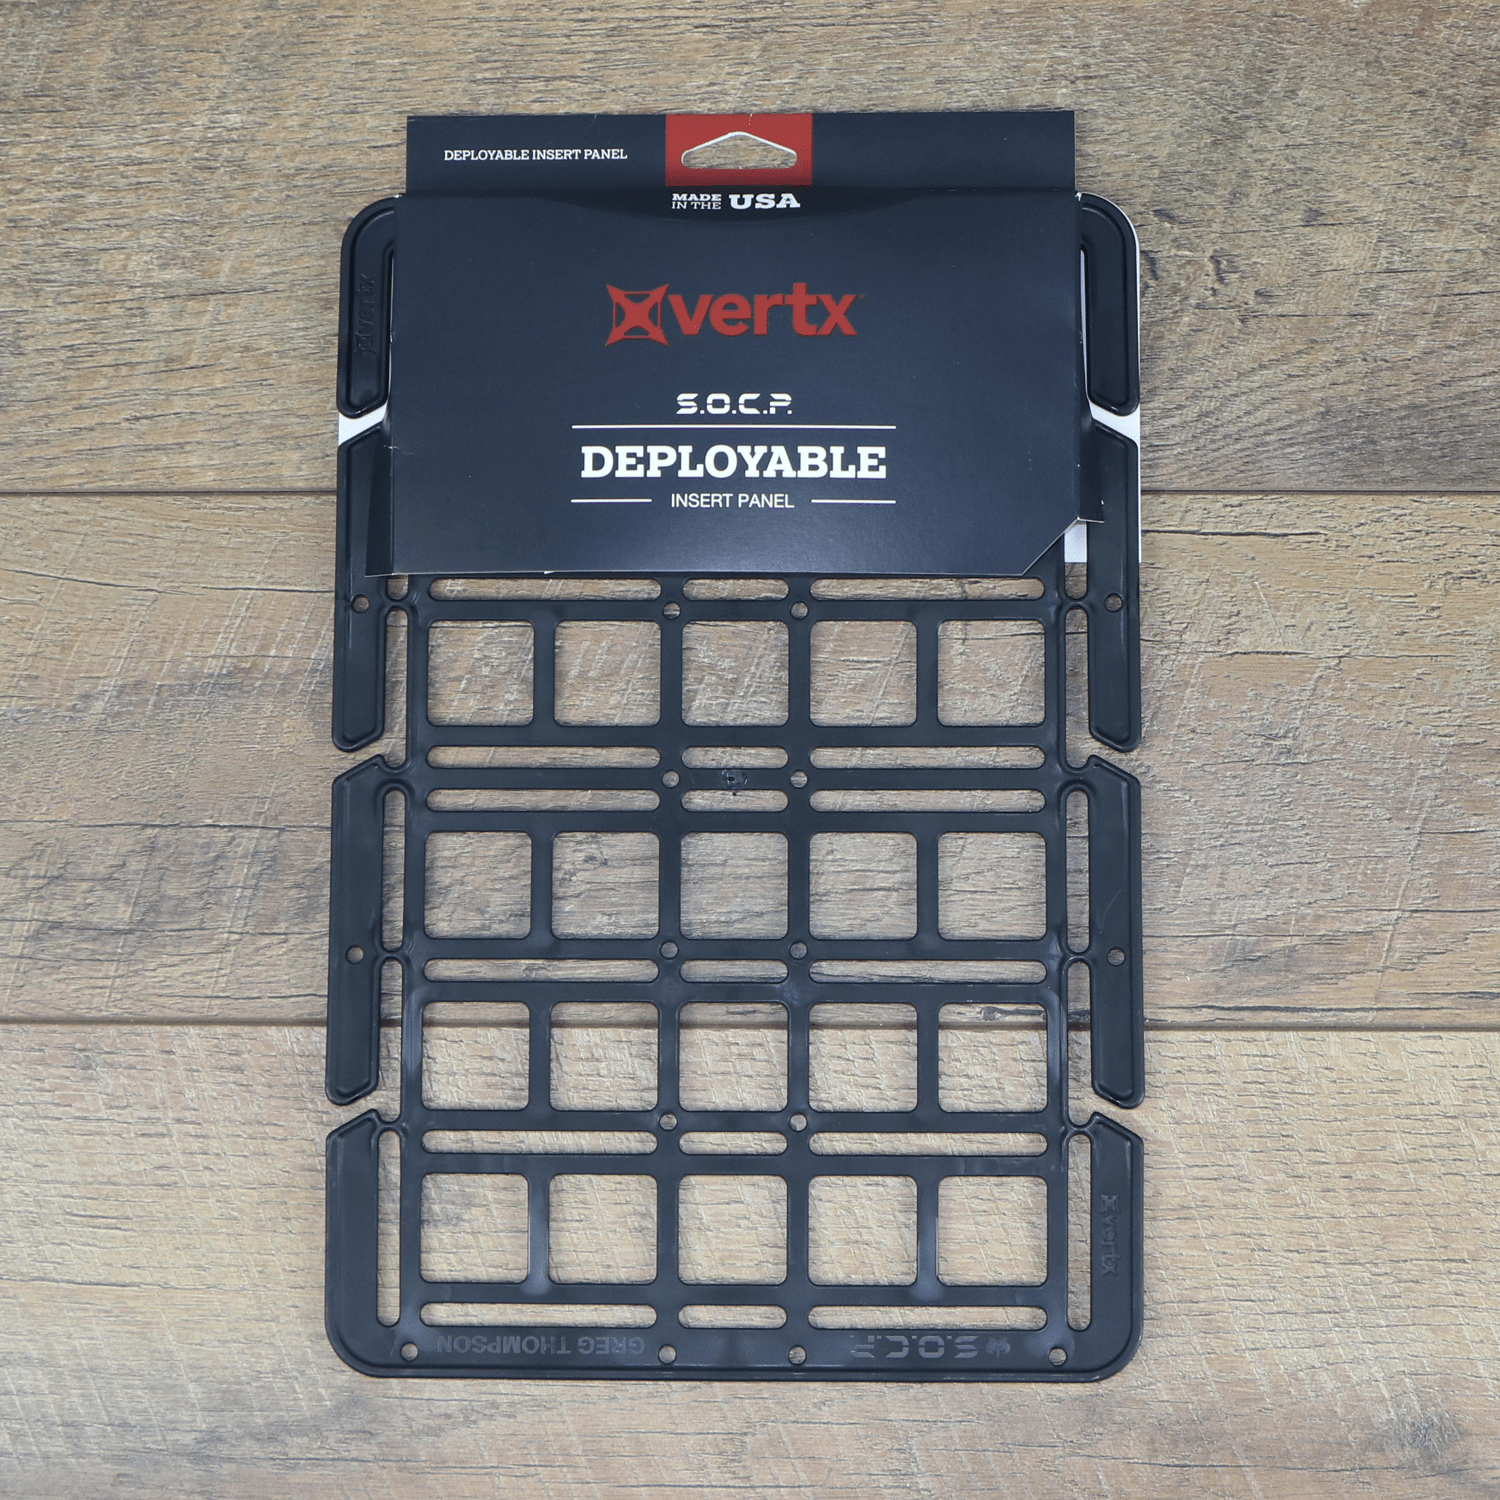 Image of Vertx SOCP deployable insert panel. The best equipment for organizing your tactical gear. 